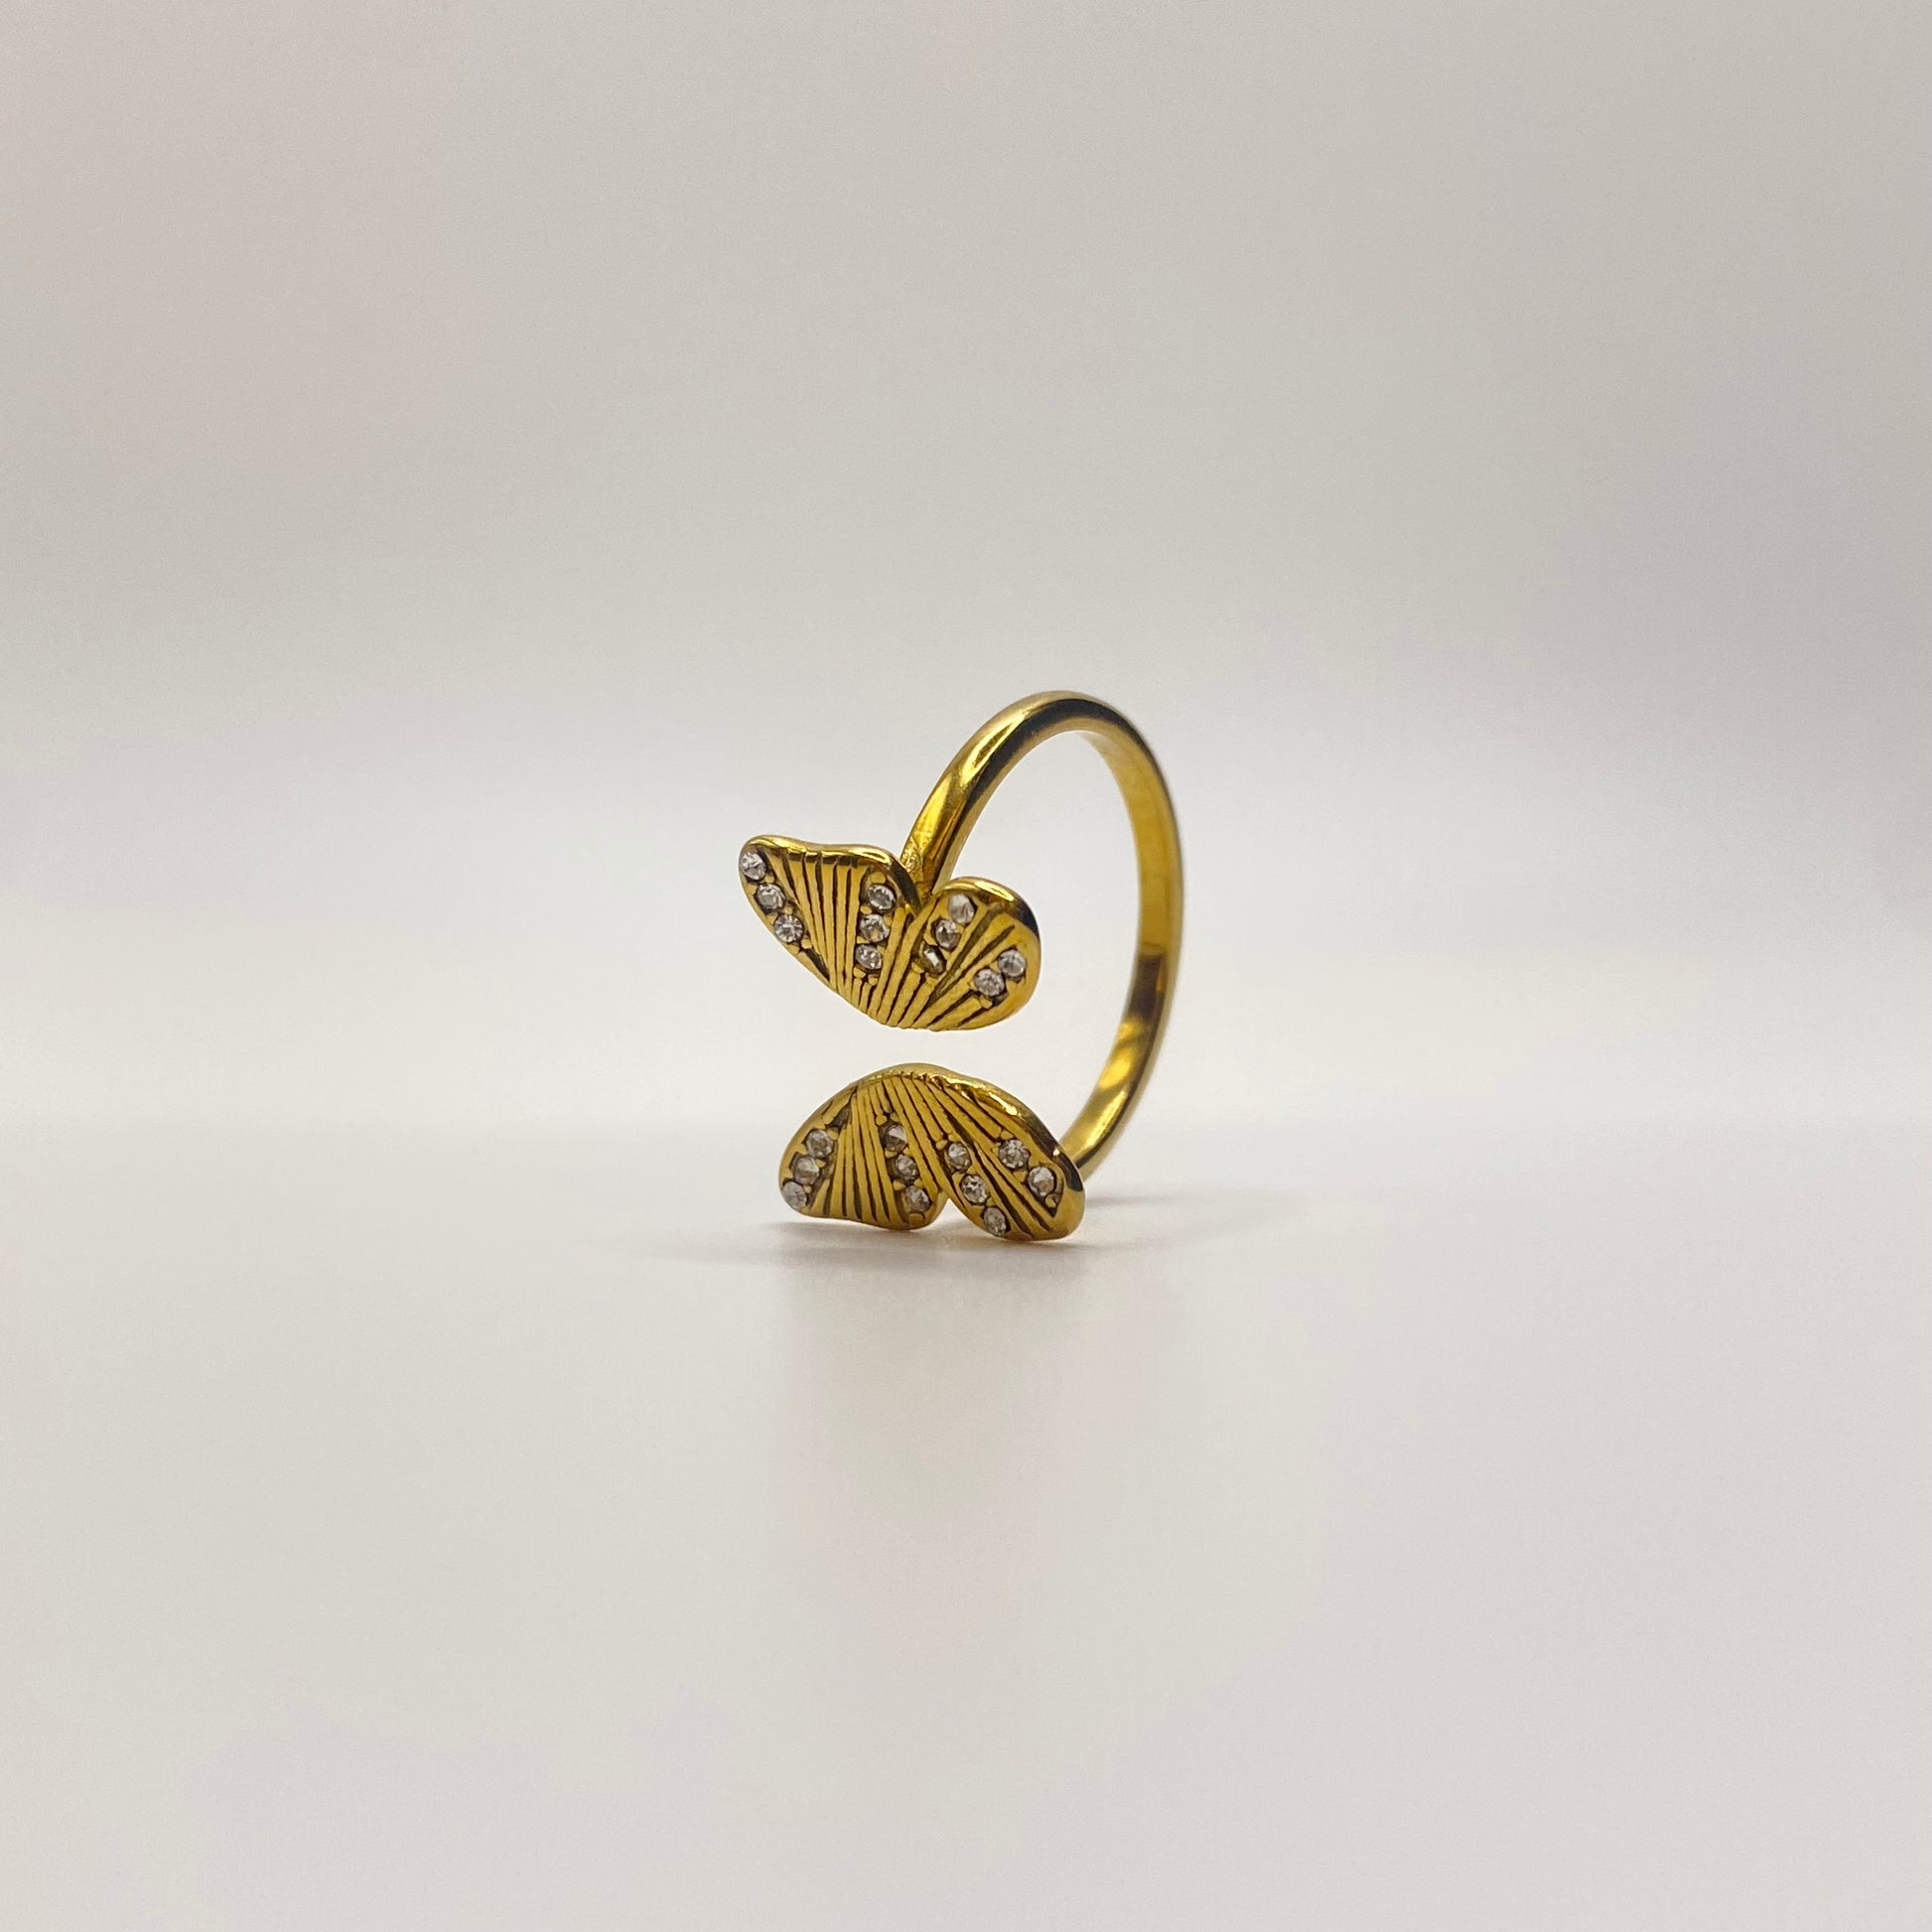 The Butterfly Ring